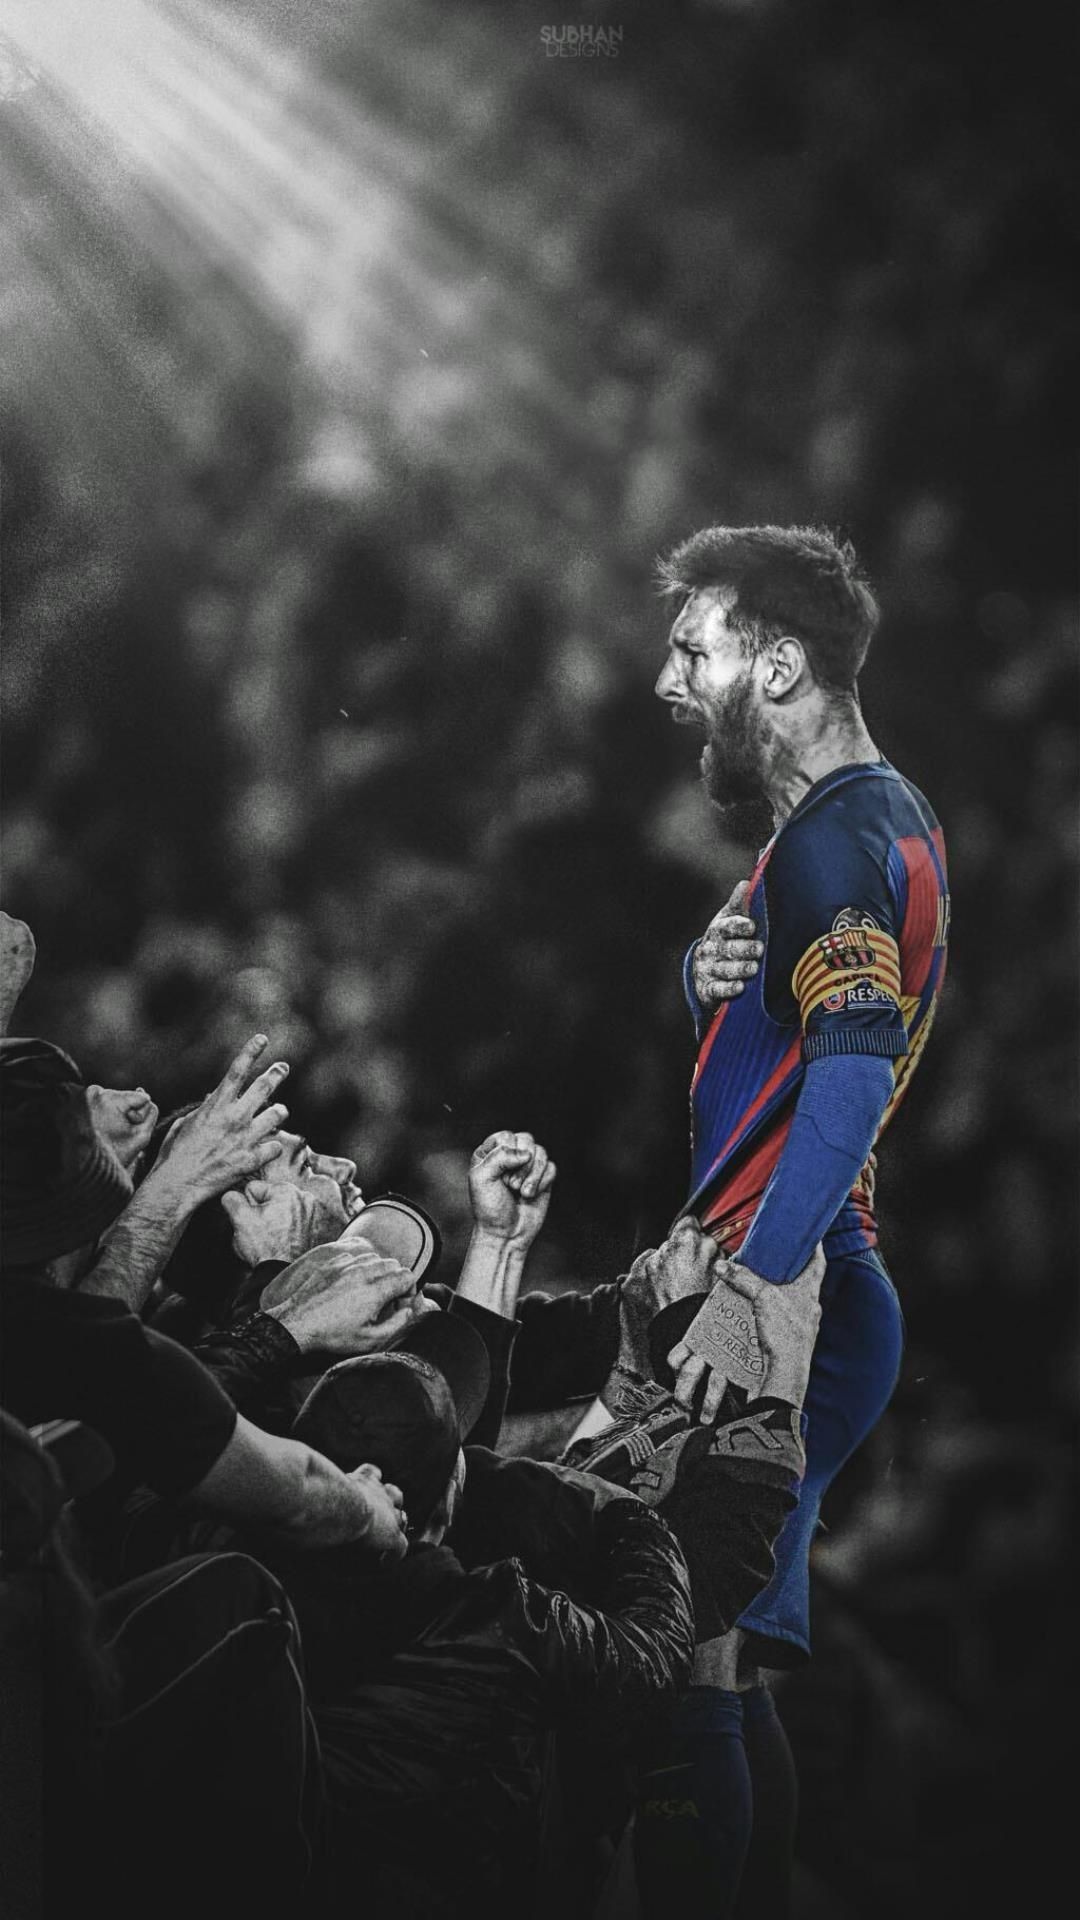 Cool Lionel Messi Wallpaper HD For Free Download Quotes